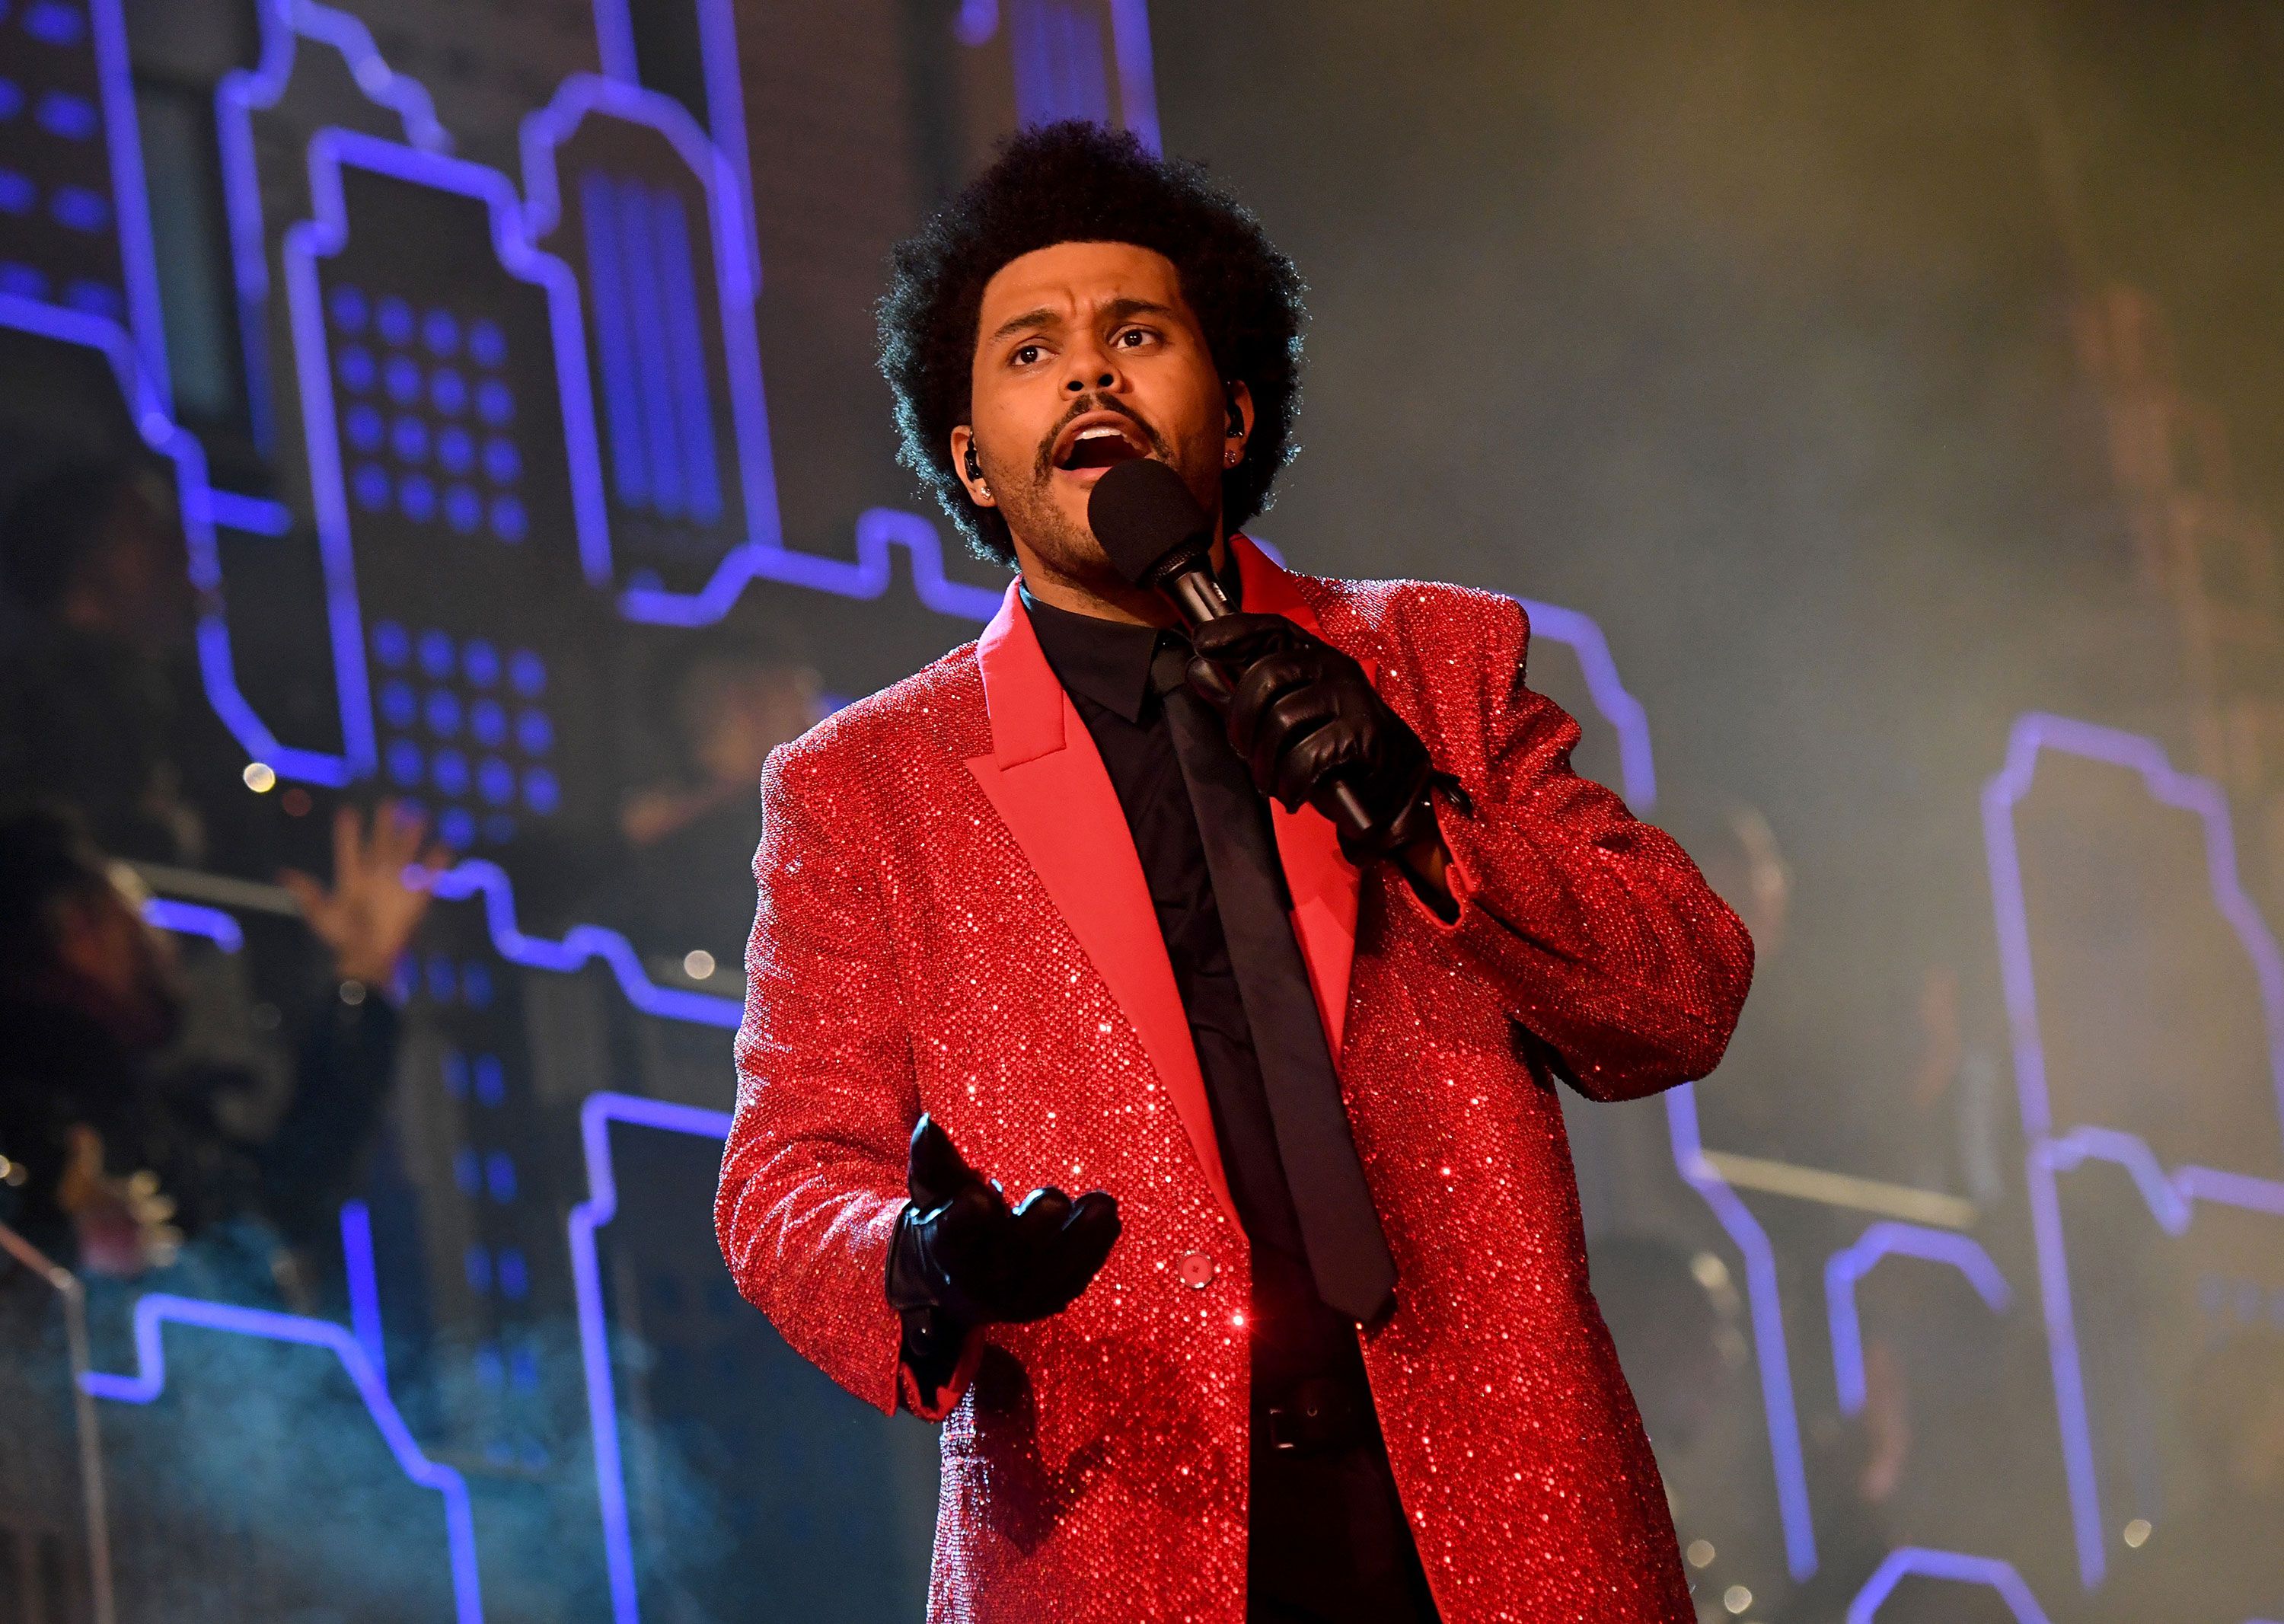 Review: The Weeknd's Super Bowl LV Halftime Show Performance